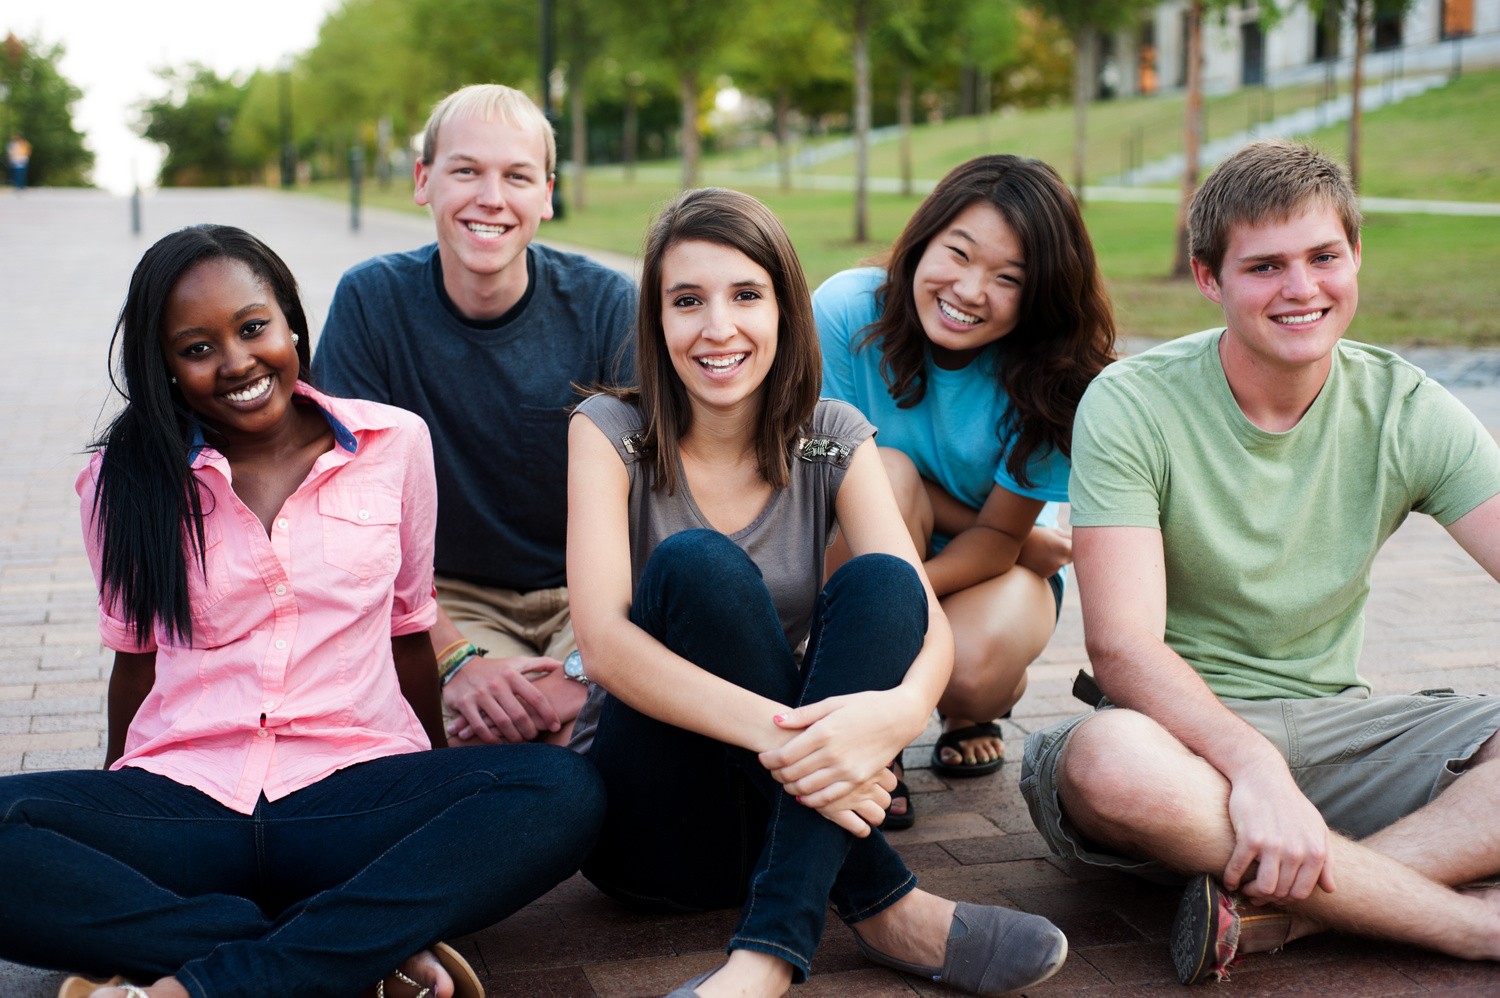 Diverse group of friends outside smiling together in special ed